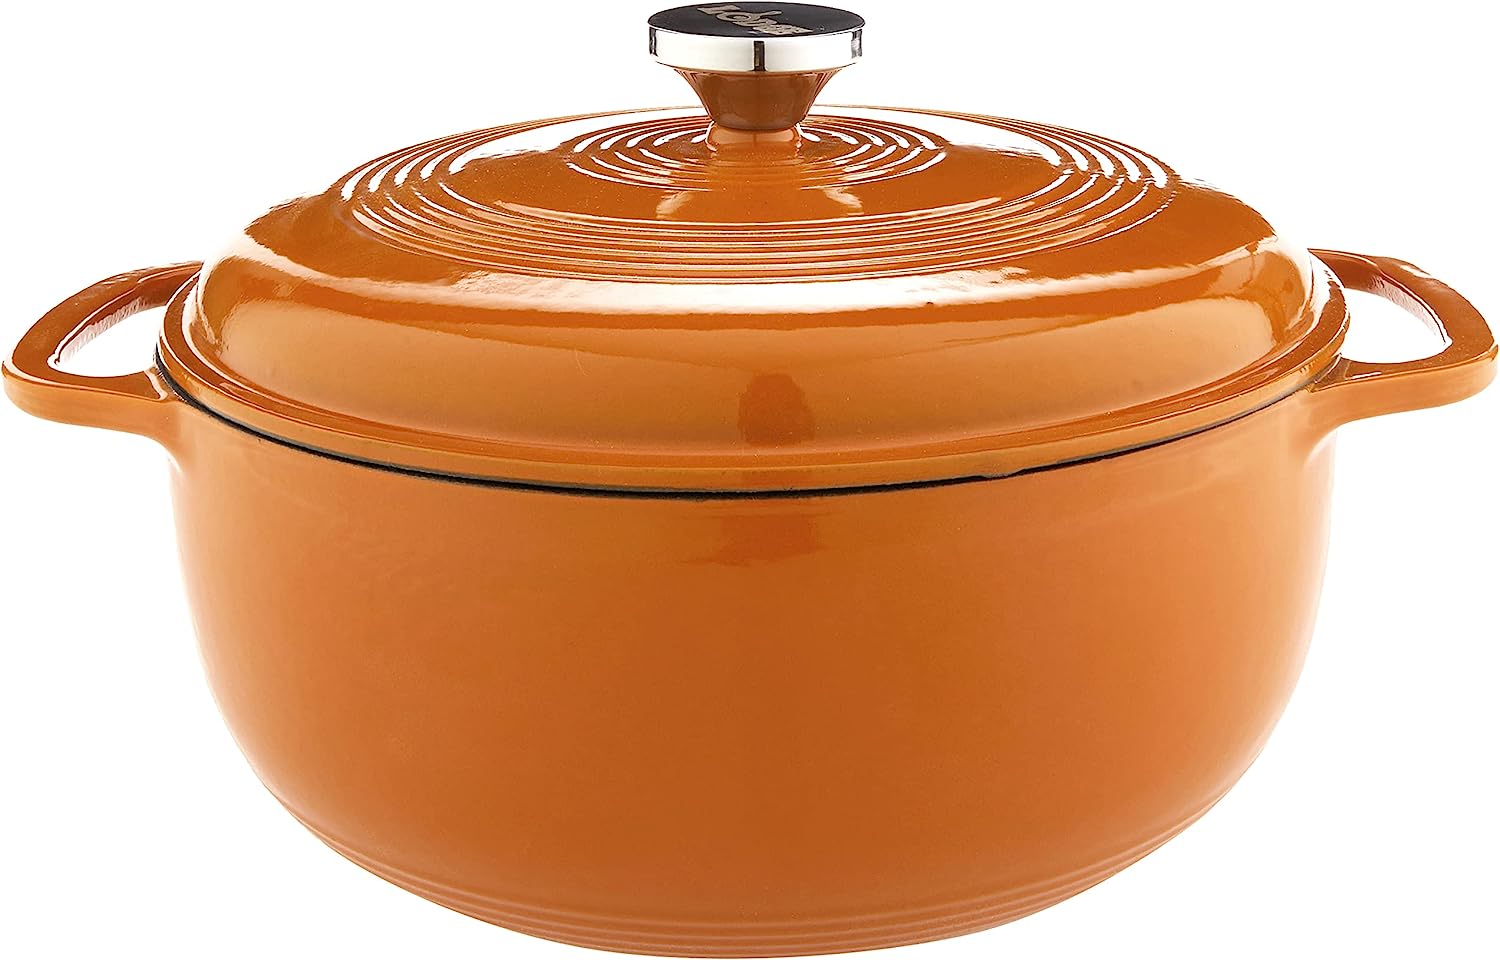 Lodge 6 Quart Enameled Cast Iron Dutch Oven with Lid – Dual Handles – Oven  Safe up to 500° F or on Stovetop - Use to Marinate, Cook, Bake, Refrigerate  and Serve – Apricot